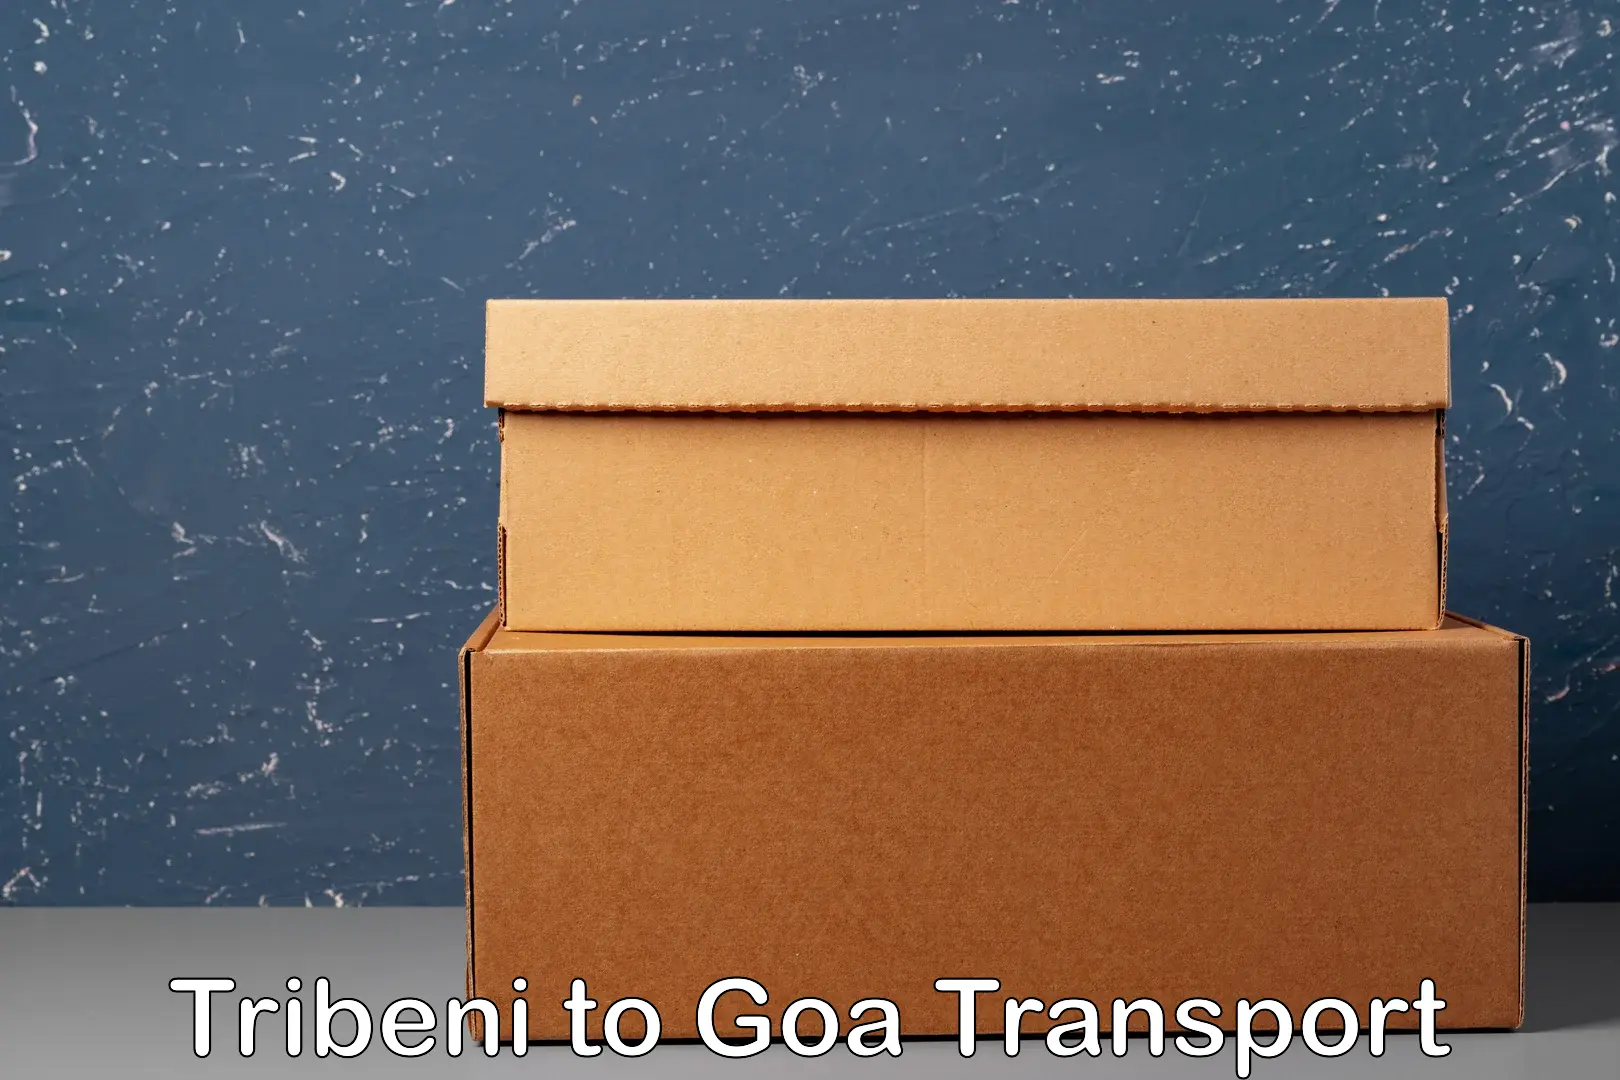 Transport shared services in Tribeni to Goa